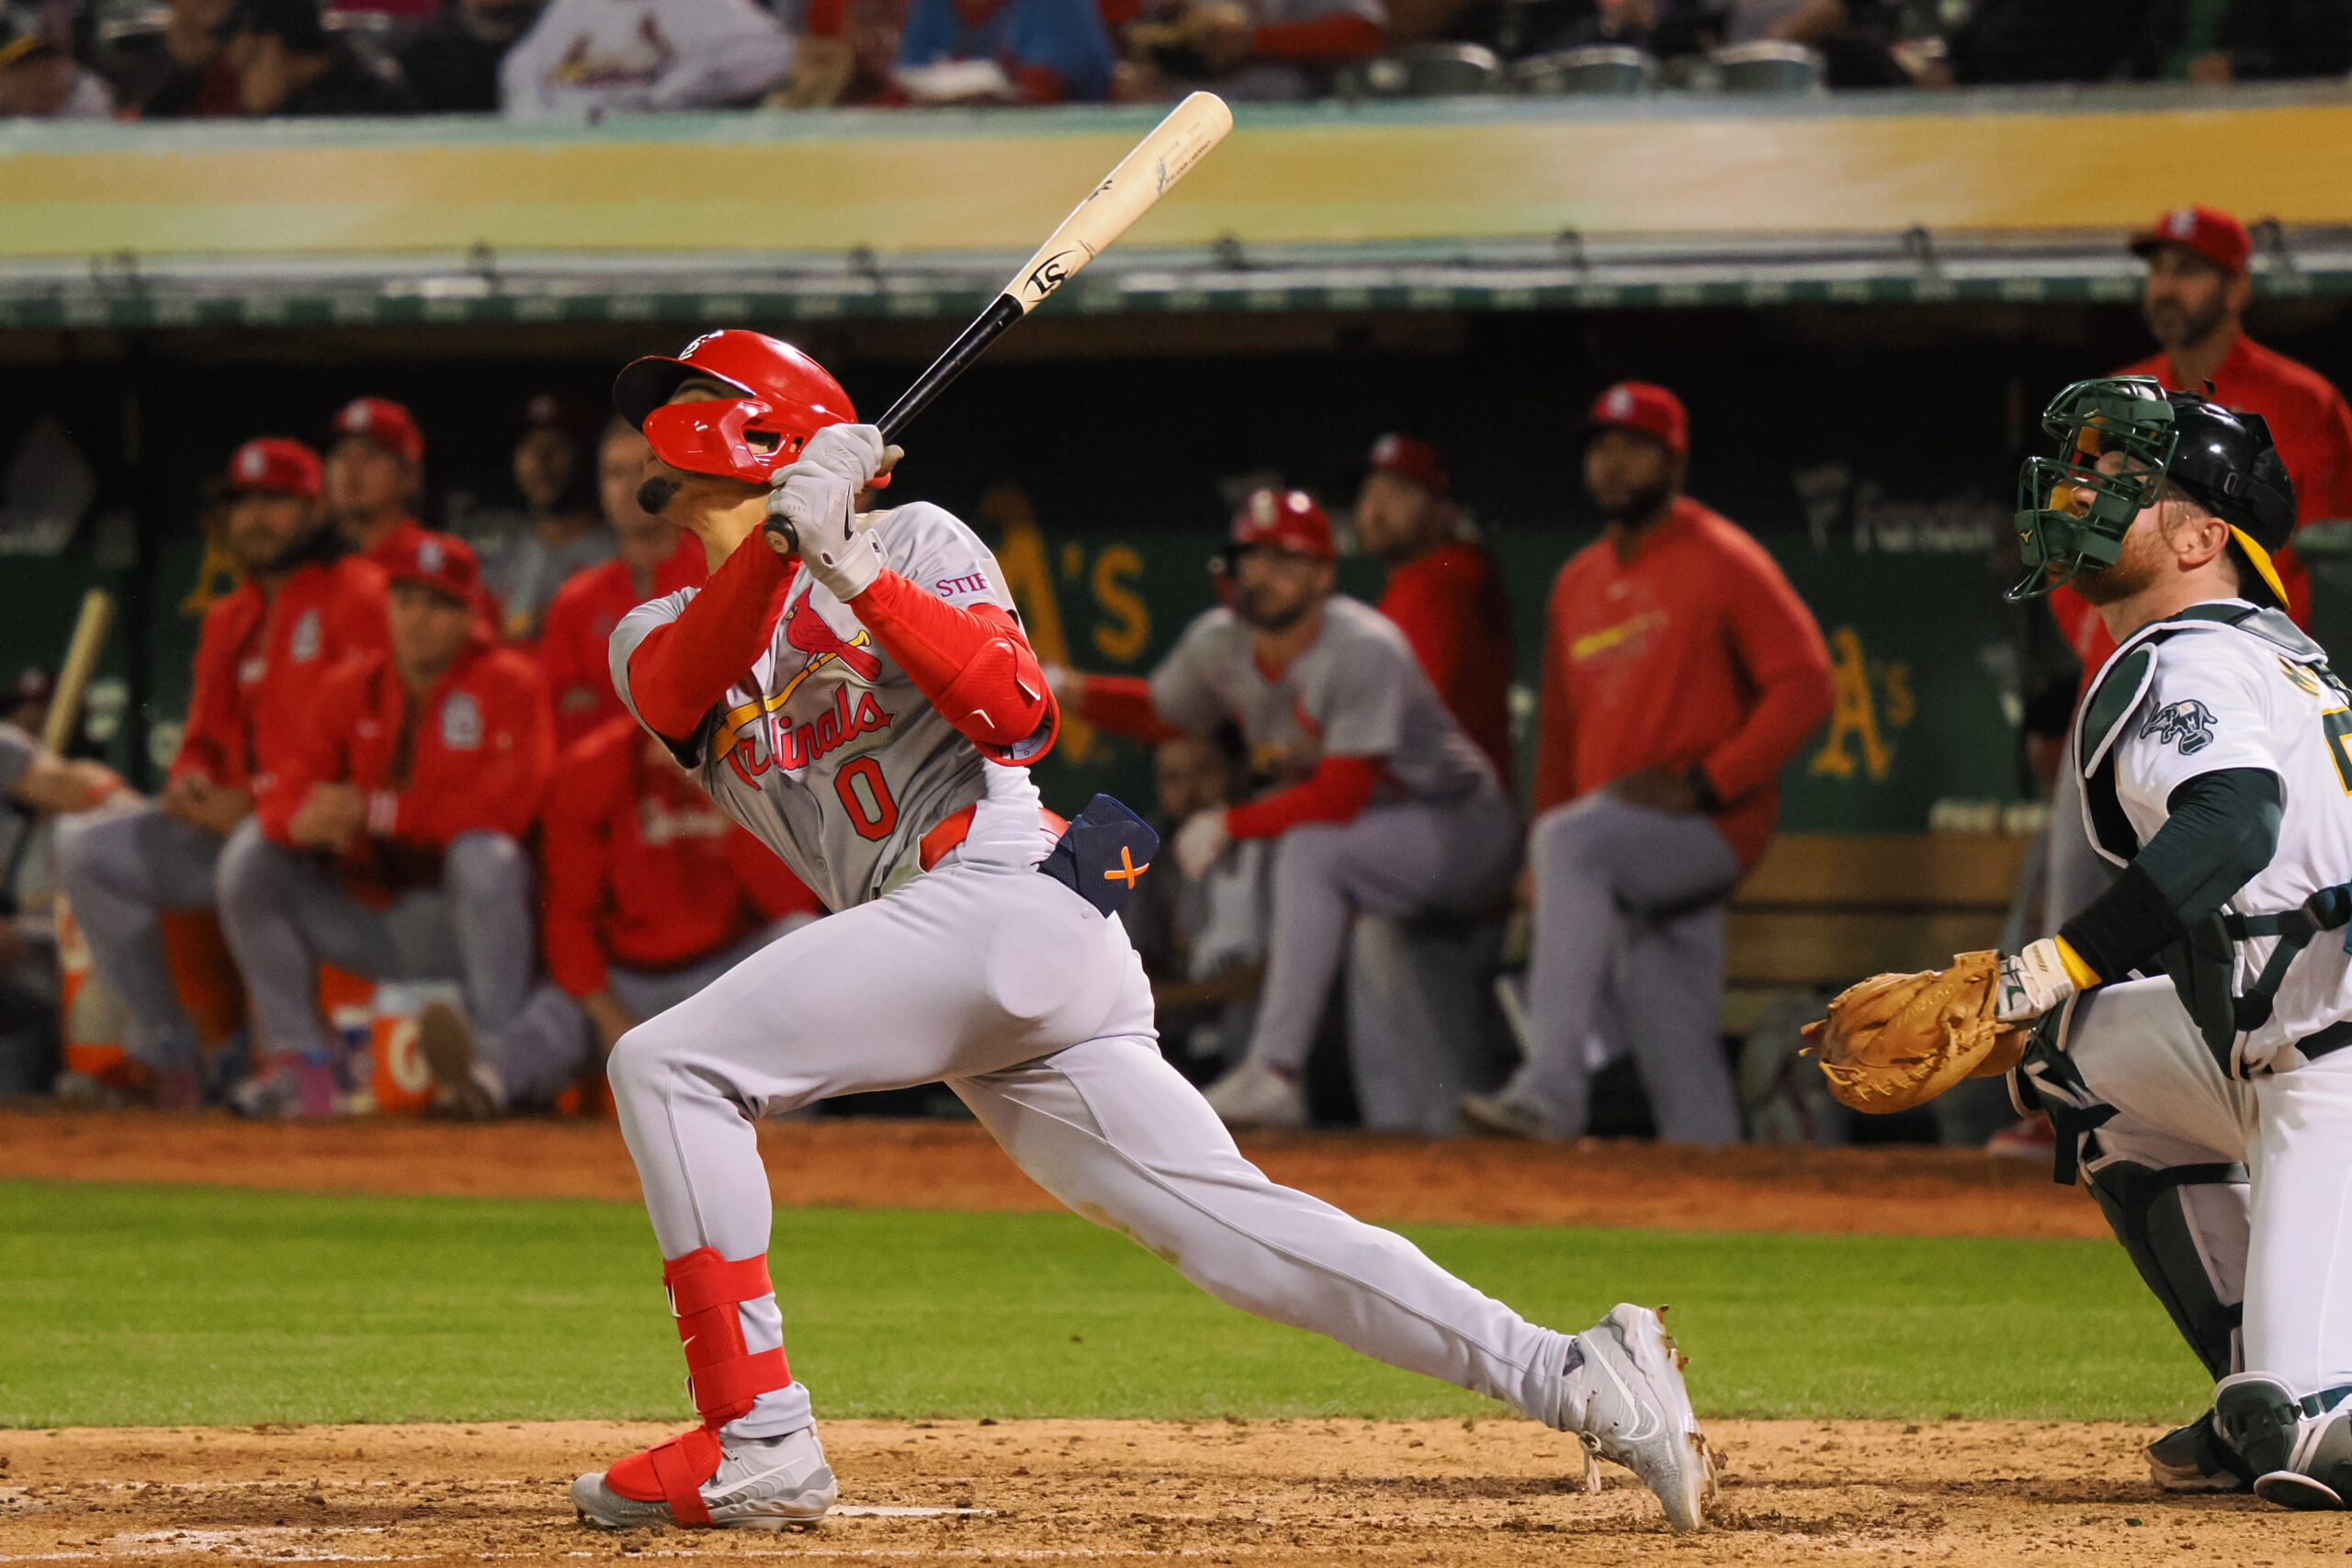 St. Louis Cardinals Rookie Shortstop Masyn Winn Making Strong Case for Permanent Starting Role